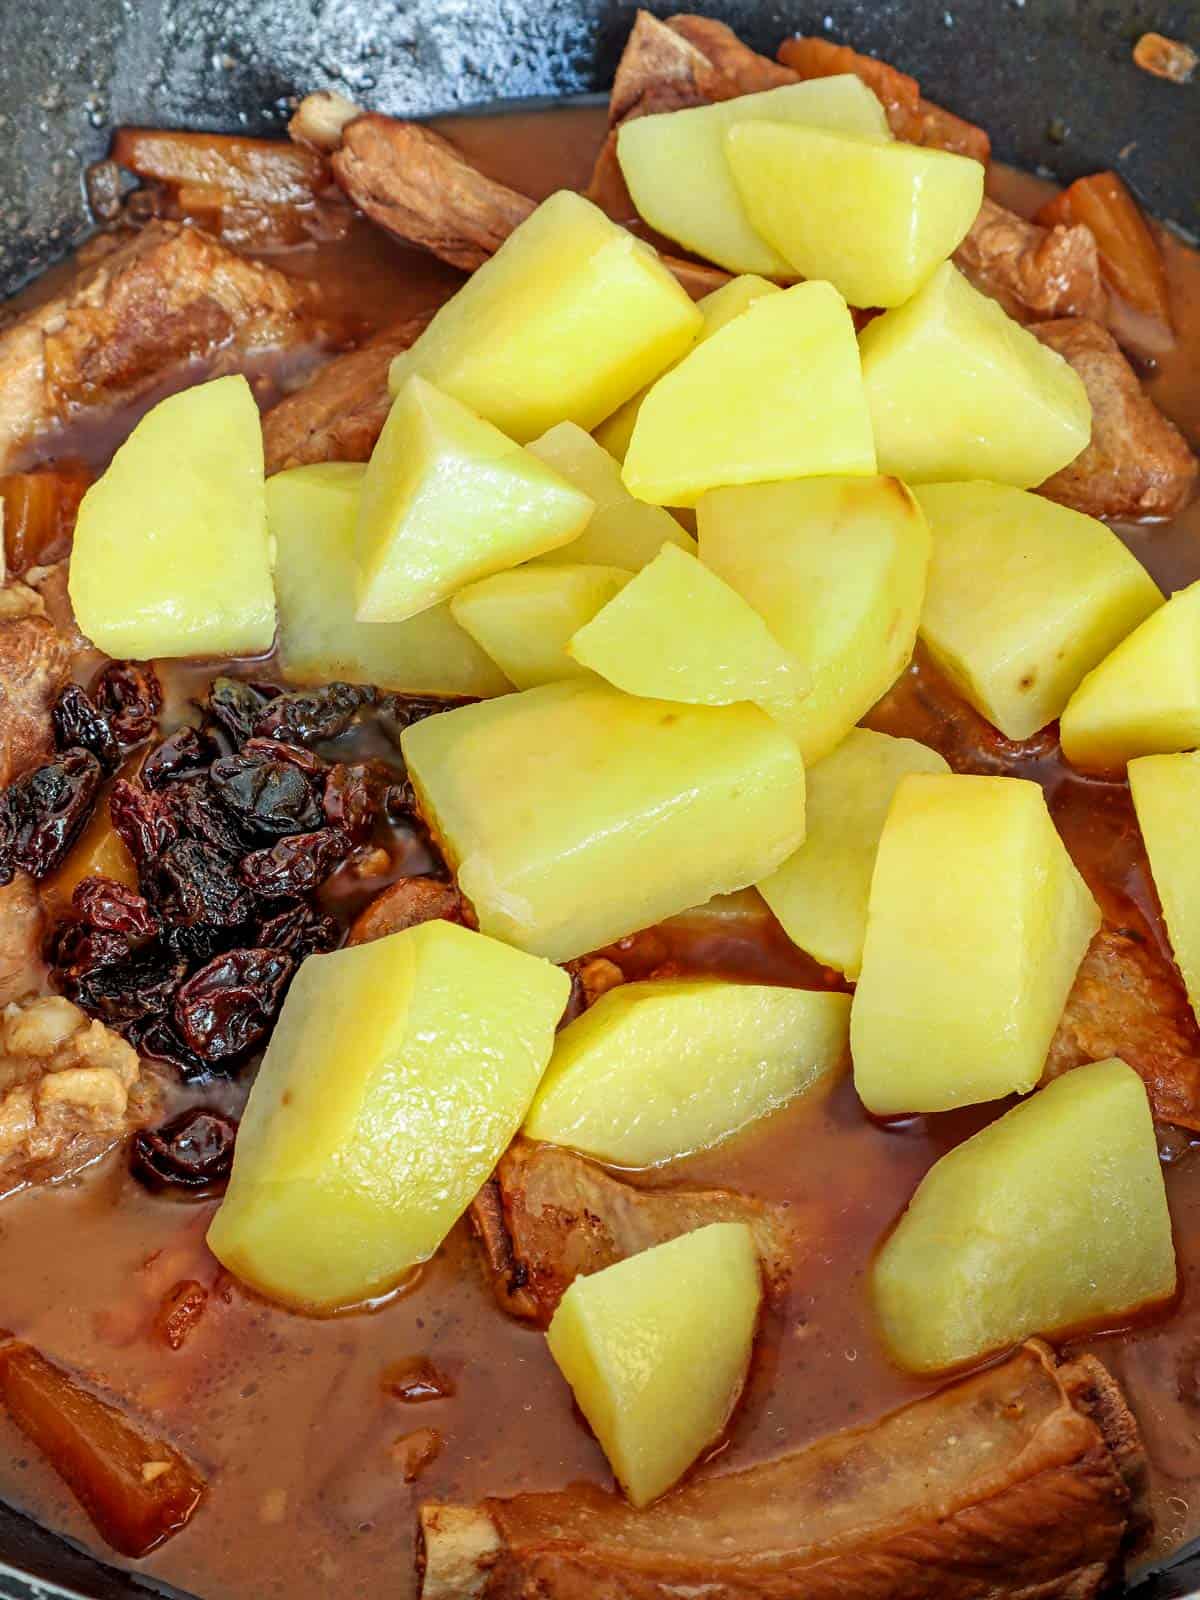 pork ribs cooked with pineapple juice, potatoes, and riasins in a pan